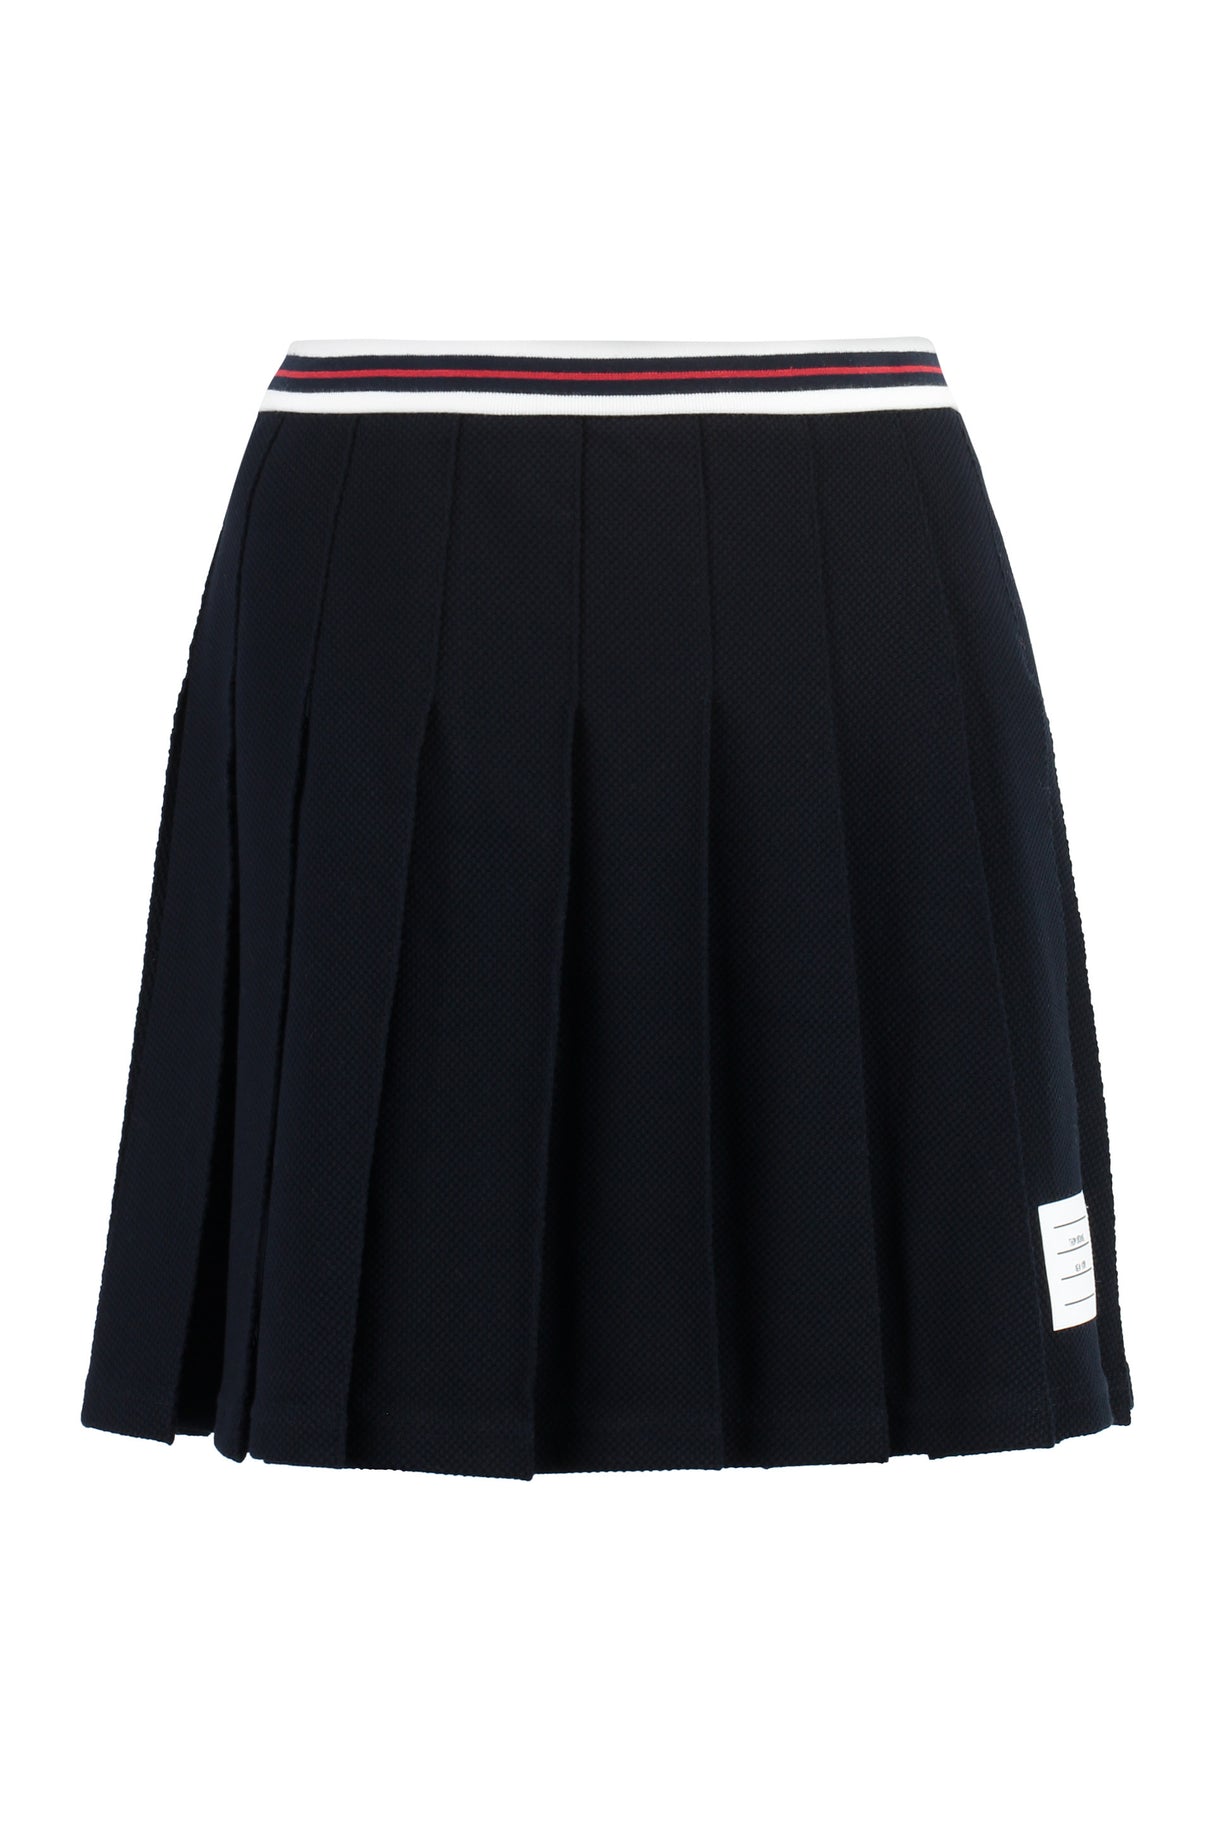 THOM BROWNE Blue Cotton Skirt for Women - FW23 Collection